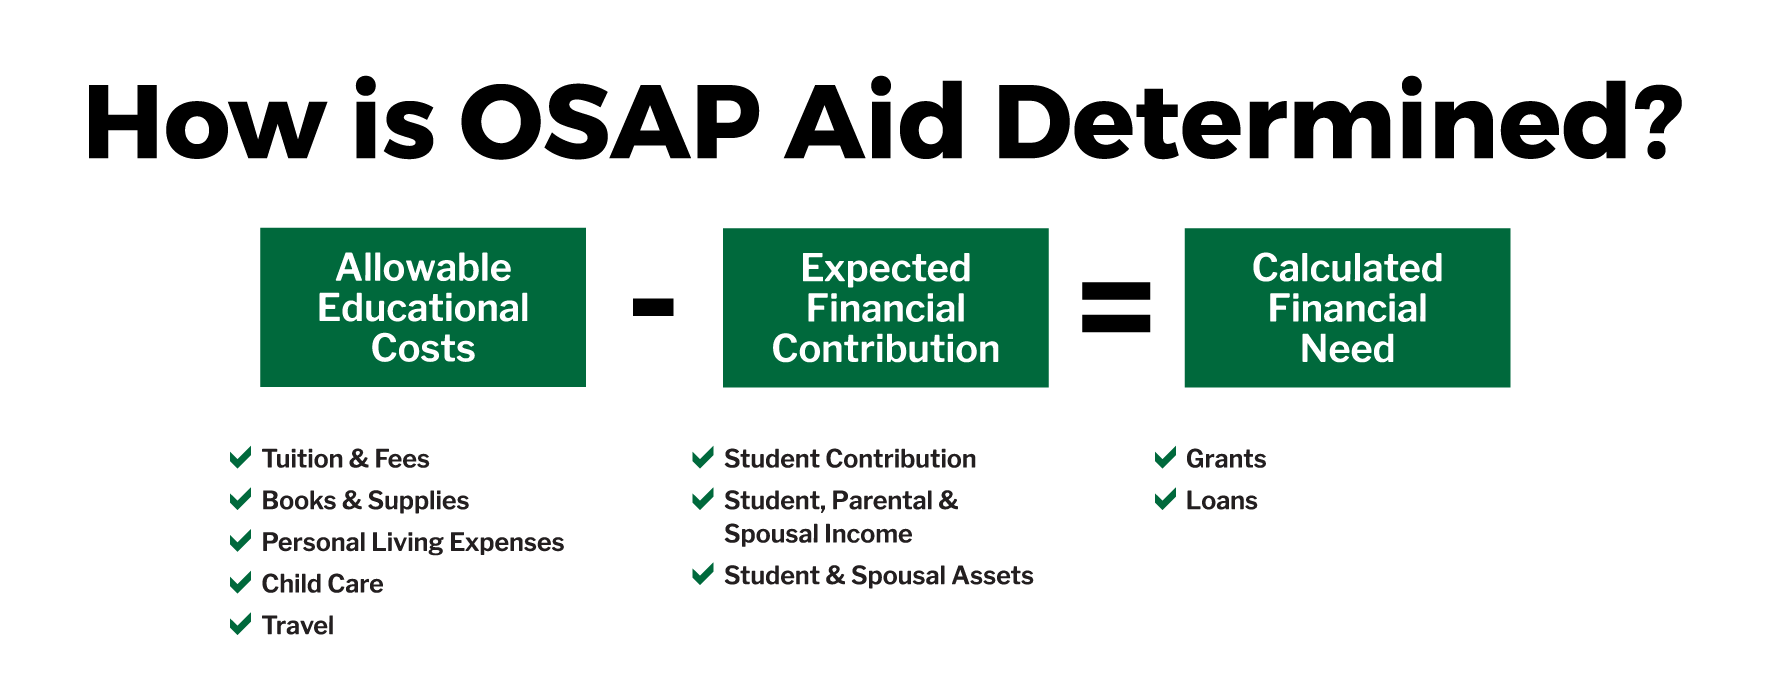 Chart showing how osap is determined